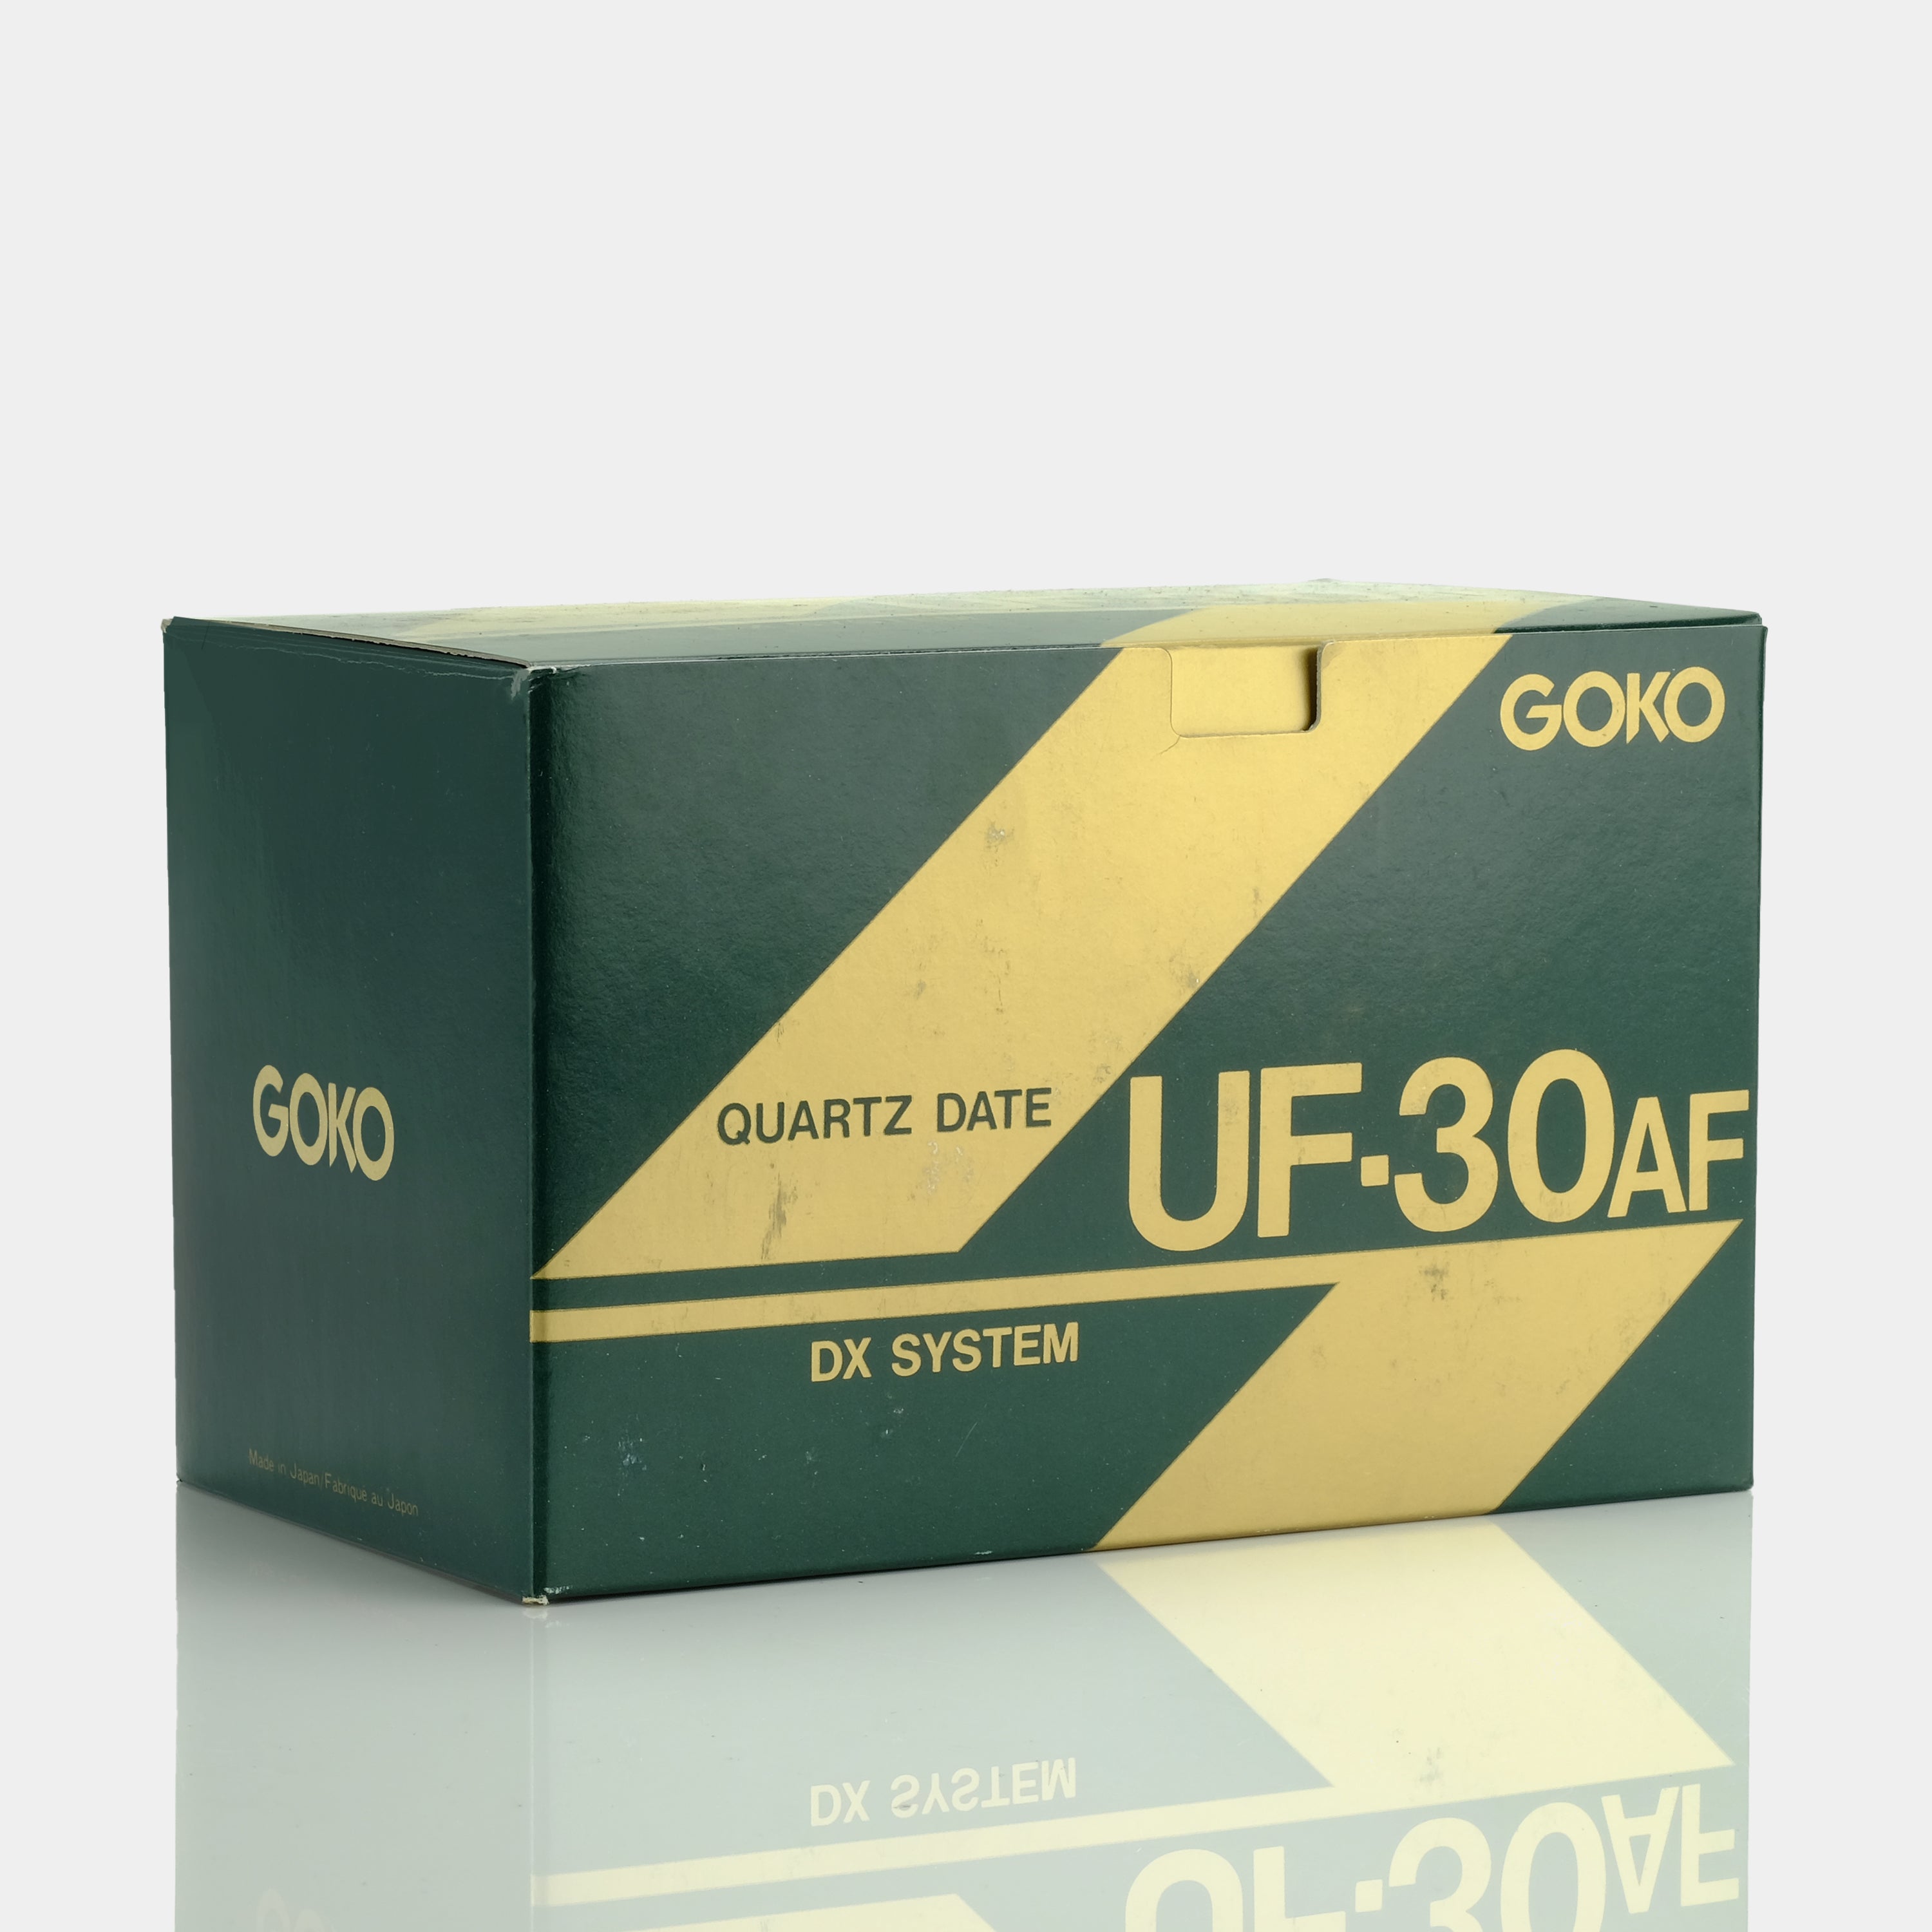 GOKO UF-30 AF 35mm Point and Shoot Film Camera (New Old Stock)